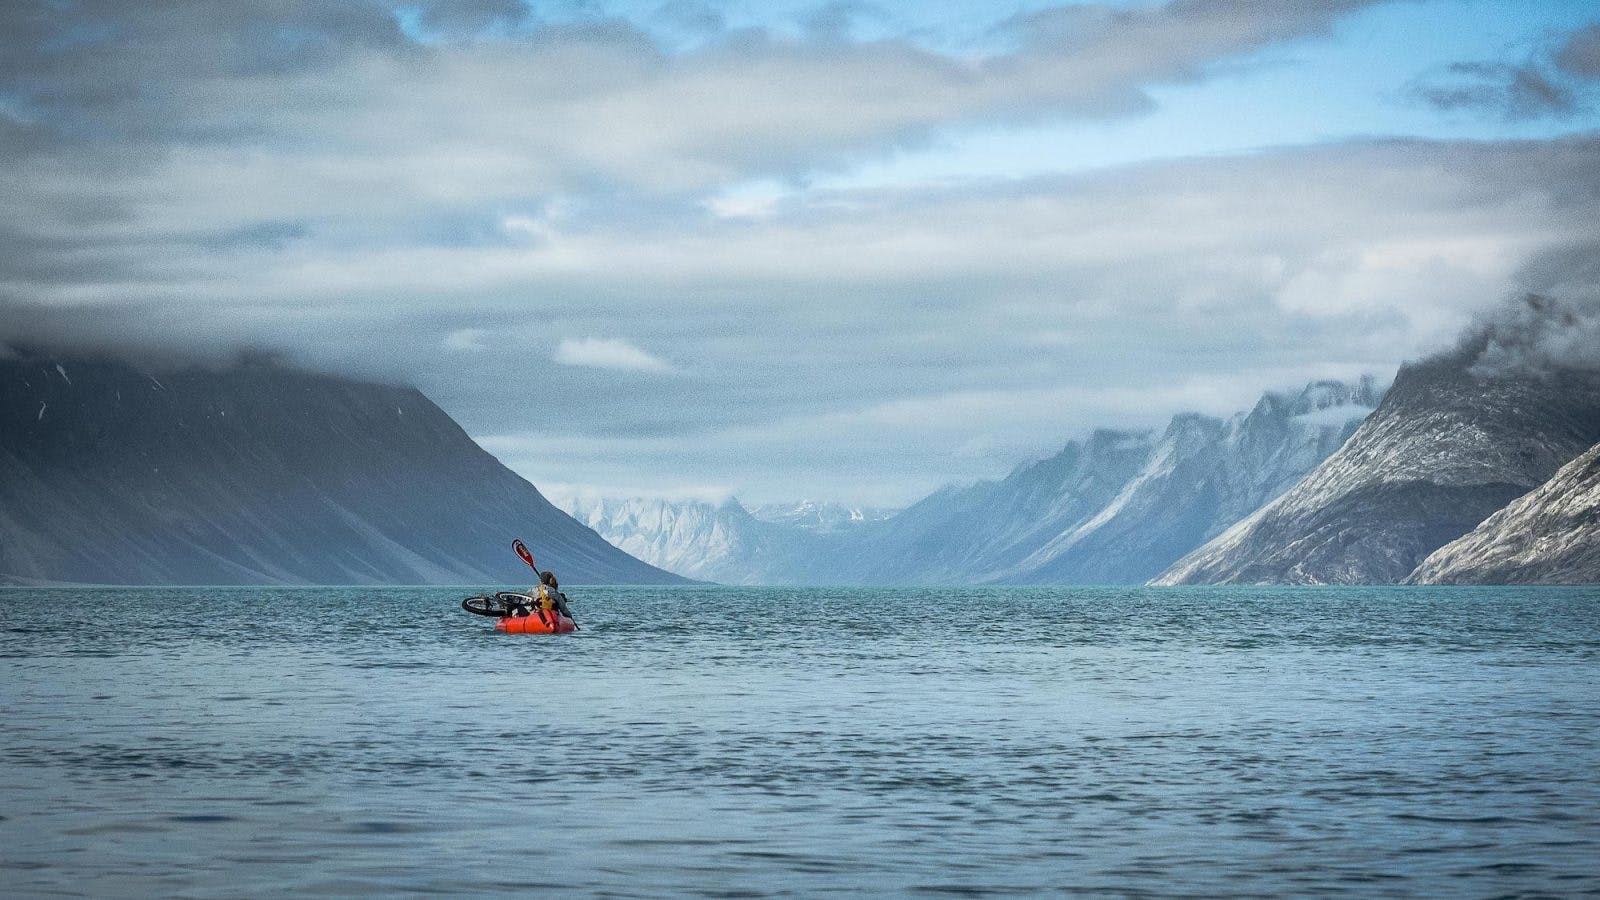 &quot;At some point we had to cross the fjord, but we were pretty nervous as for several days we had watched the wind whip up big swells far more quickly than we could make the 4km crossing. The evening when we finally went for it, we had been awake from 5am to catch the tide, ridden the swells nearly 40km and then had to jump off the water as the tide swung against us. We watched and waited, the wind dropping but the swell hanging around much longer. Eventually, after much deliberation, we decided to cross, paddling in the gorgeous evening light and making it across about 20min before the wind picked up again so strongly that we had to make another fast exit to camp.&quot; ~Annie Le Evans